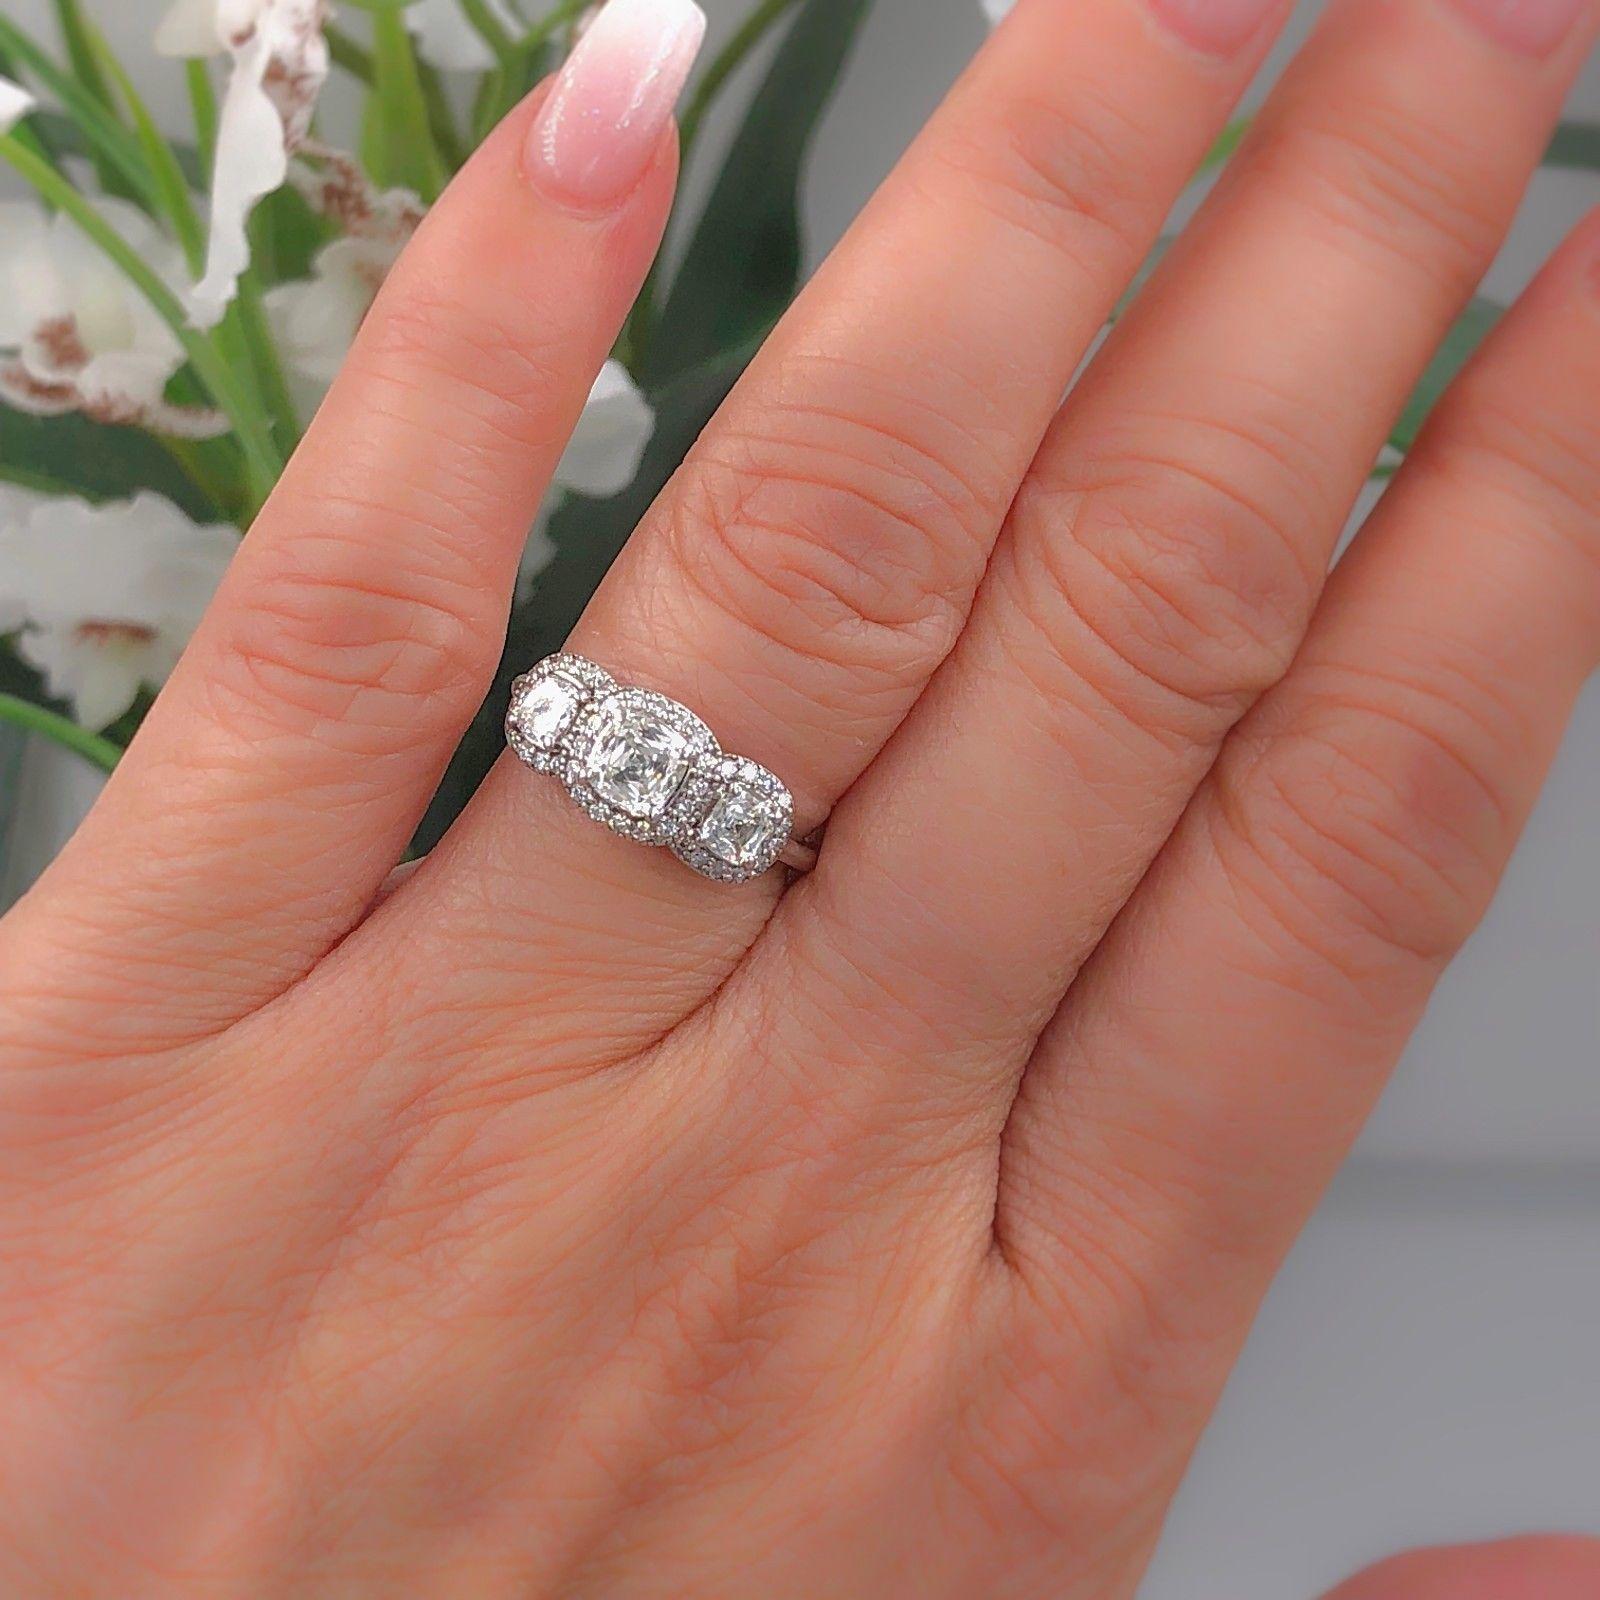 Three-Stone Cushion Brilliant Halo Design Engagement Ring

Metal:  14k White Gold
Size:  5.25 - sizable
Total Carat Weight:  1.17 tcw
Diamond Shape:  Cushion Brilliant 0.54 cts H - I / VS - SI
Side Stones:  2 Cushion Brilliant 0.44 tcw 
Accent